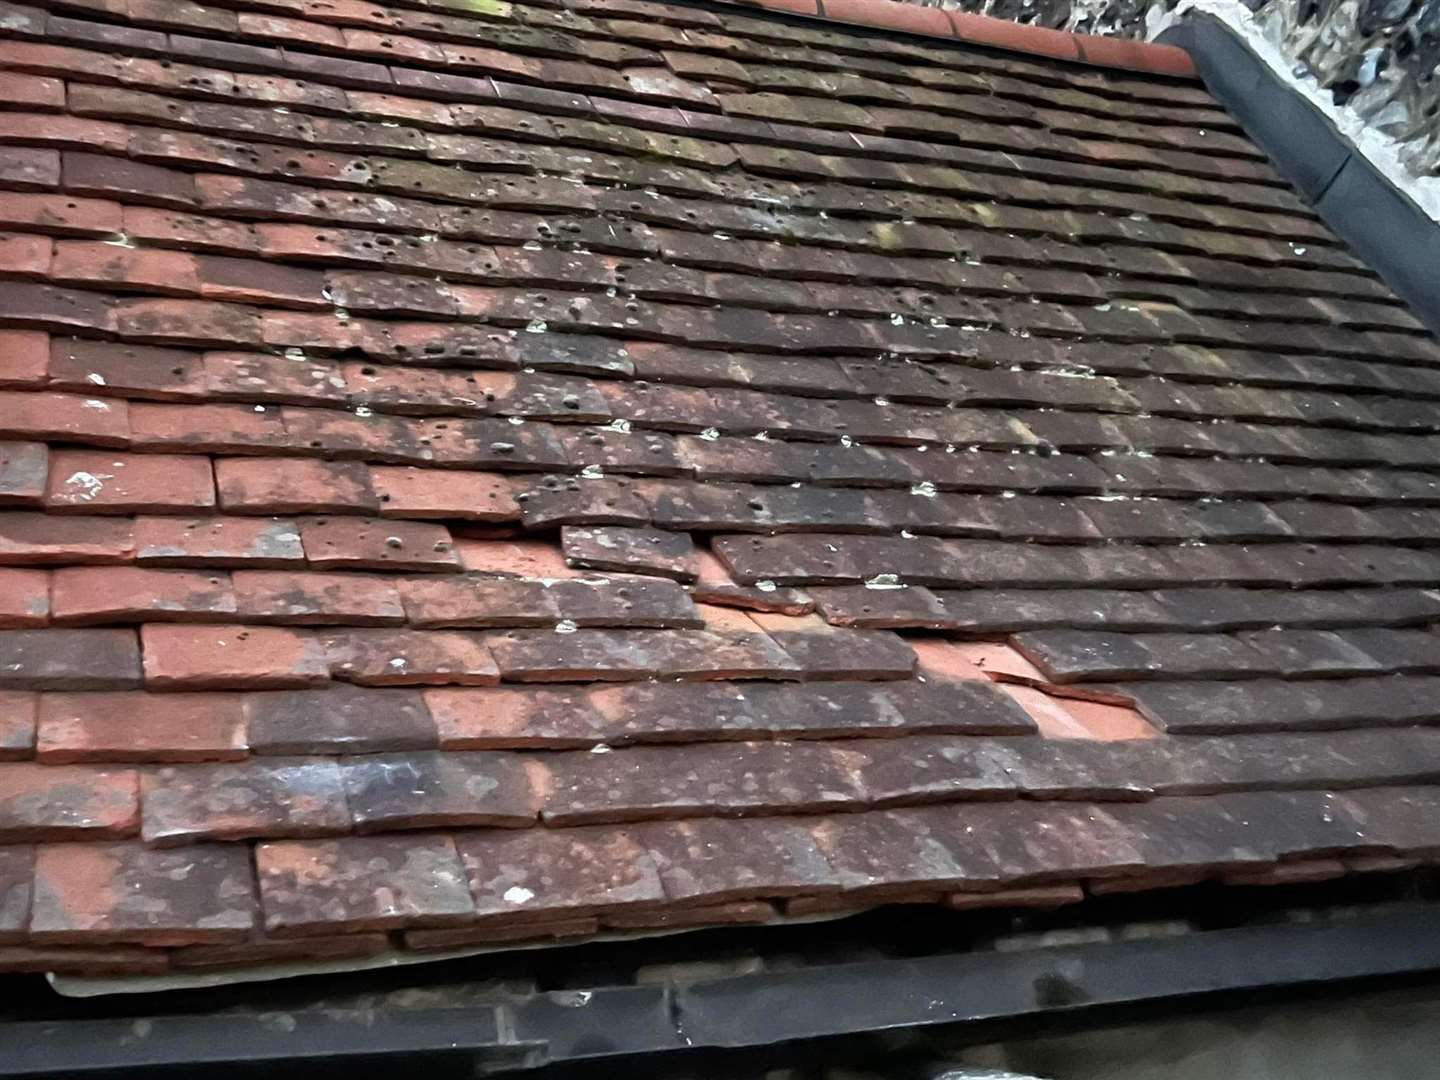 The damaged tiles at the Cliffe church